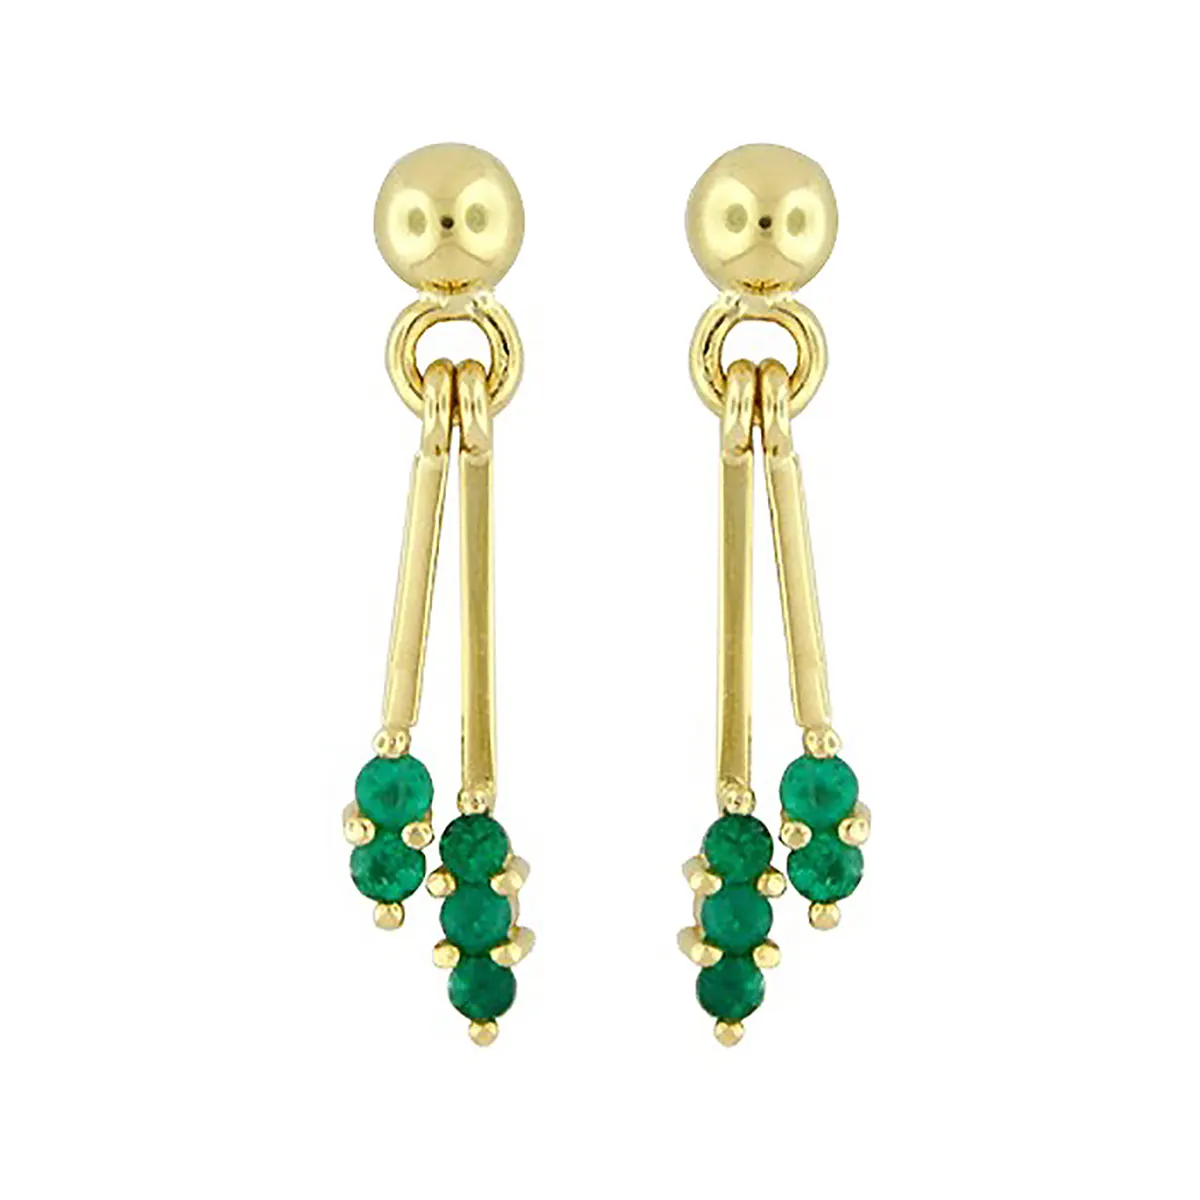 Drop emerald earrings in solid 18K yellow gold with 0.40 Ct. t.w. in 10 green color round emeralds set at the bottom of long and fine bars on each earring that move freely